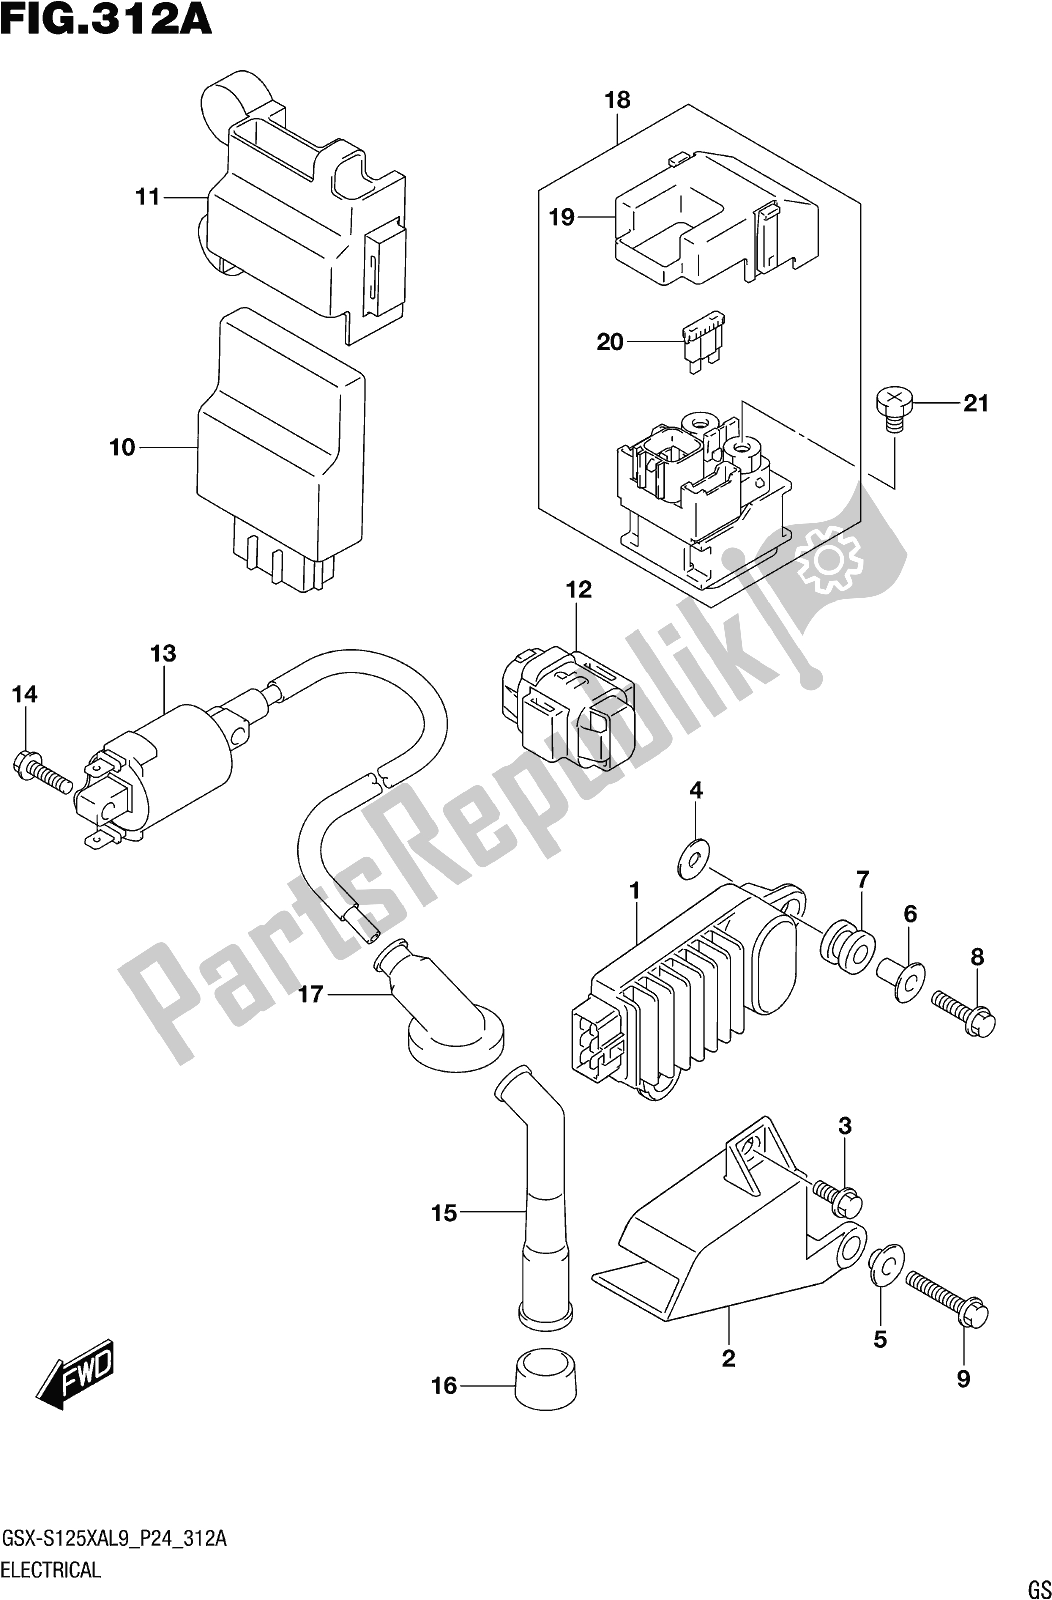 All parts for the Fig. 312a Electrical of the Suzuki Gsx-s 125 XA 2019